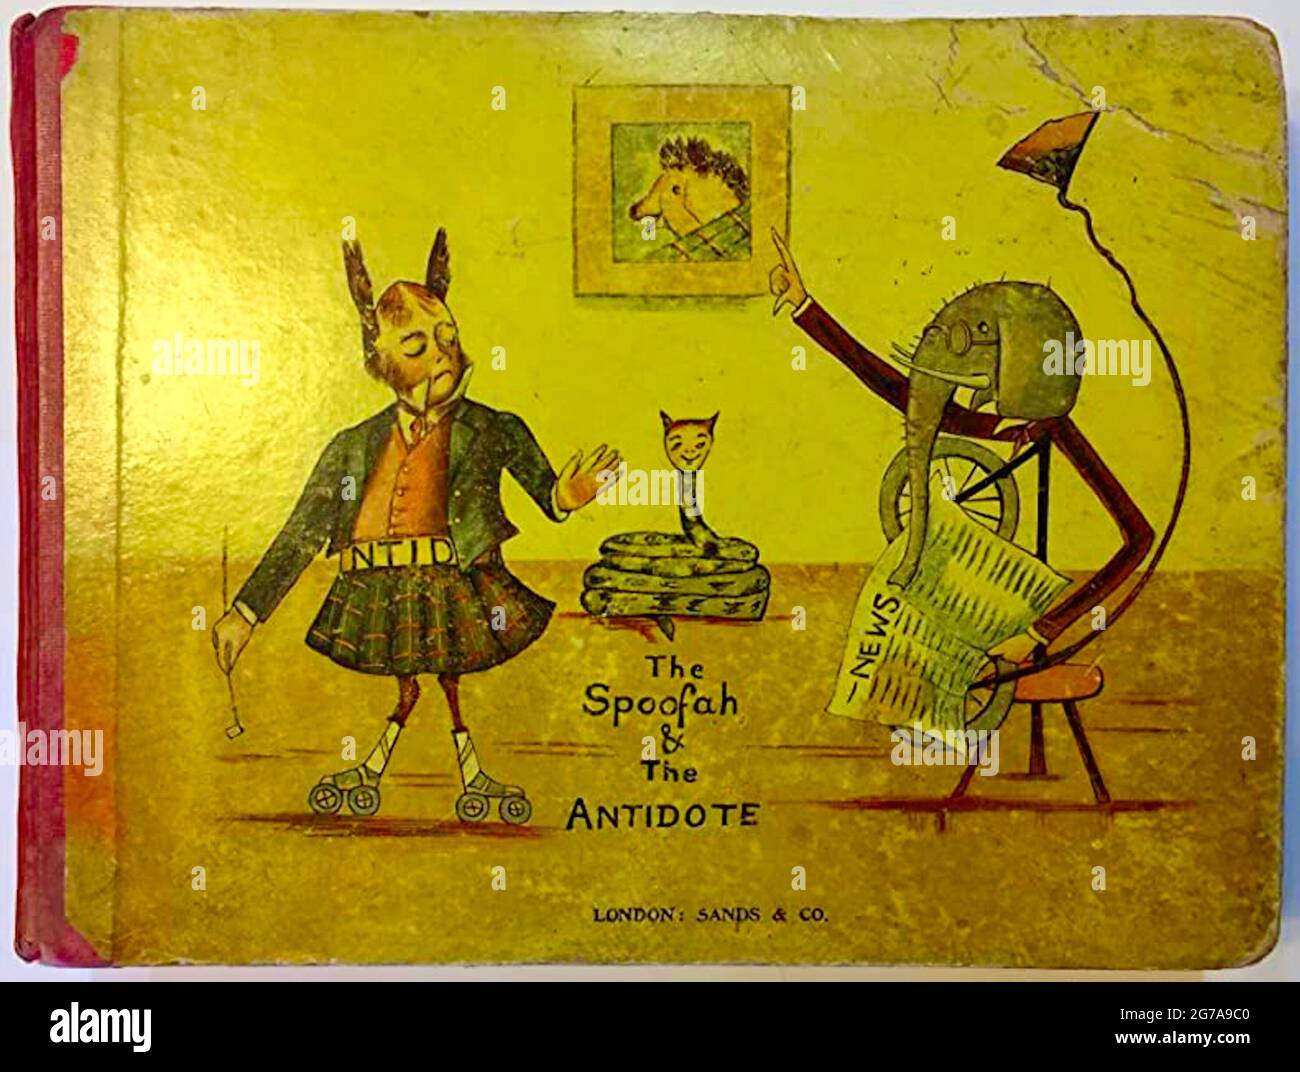 Vintage quirky artwork - The Spoofah and the Antidote - Leila Trapmann - 1898 Stock Photo